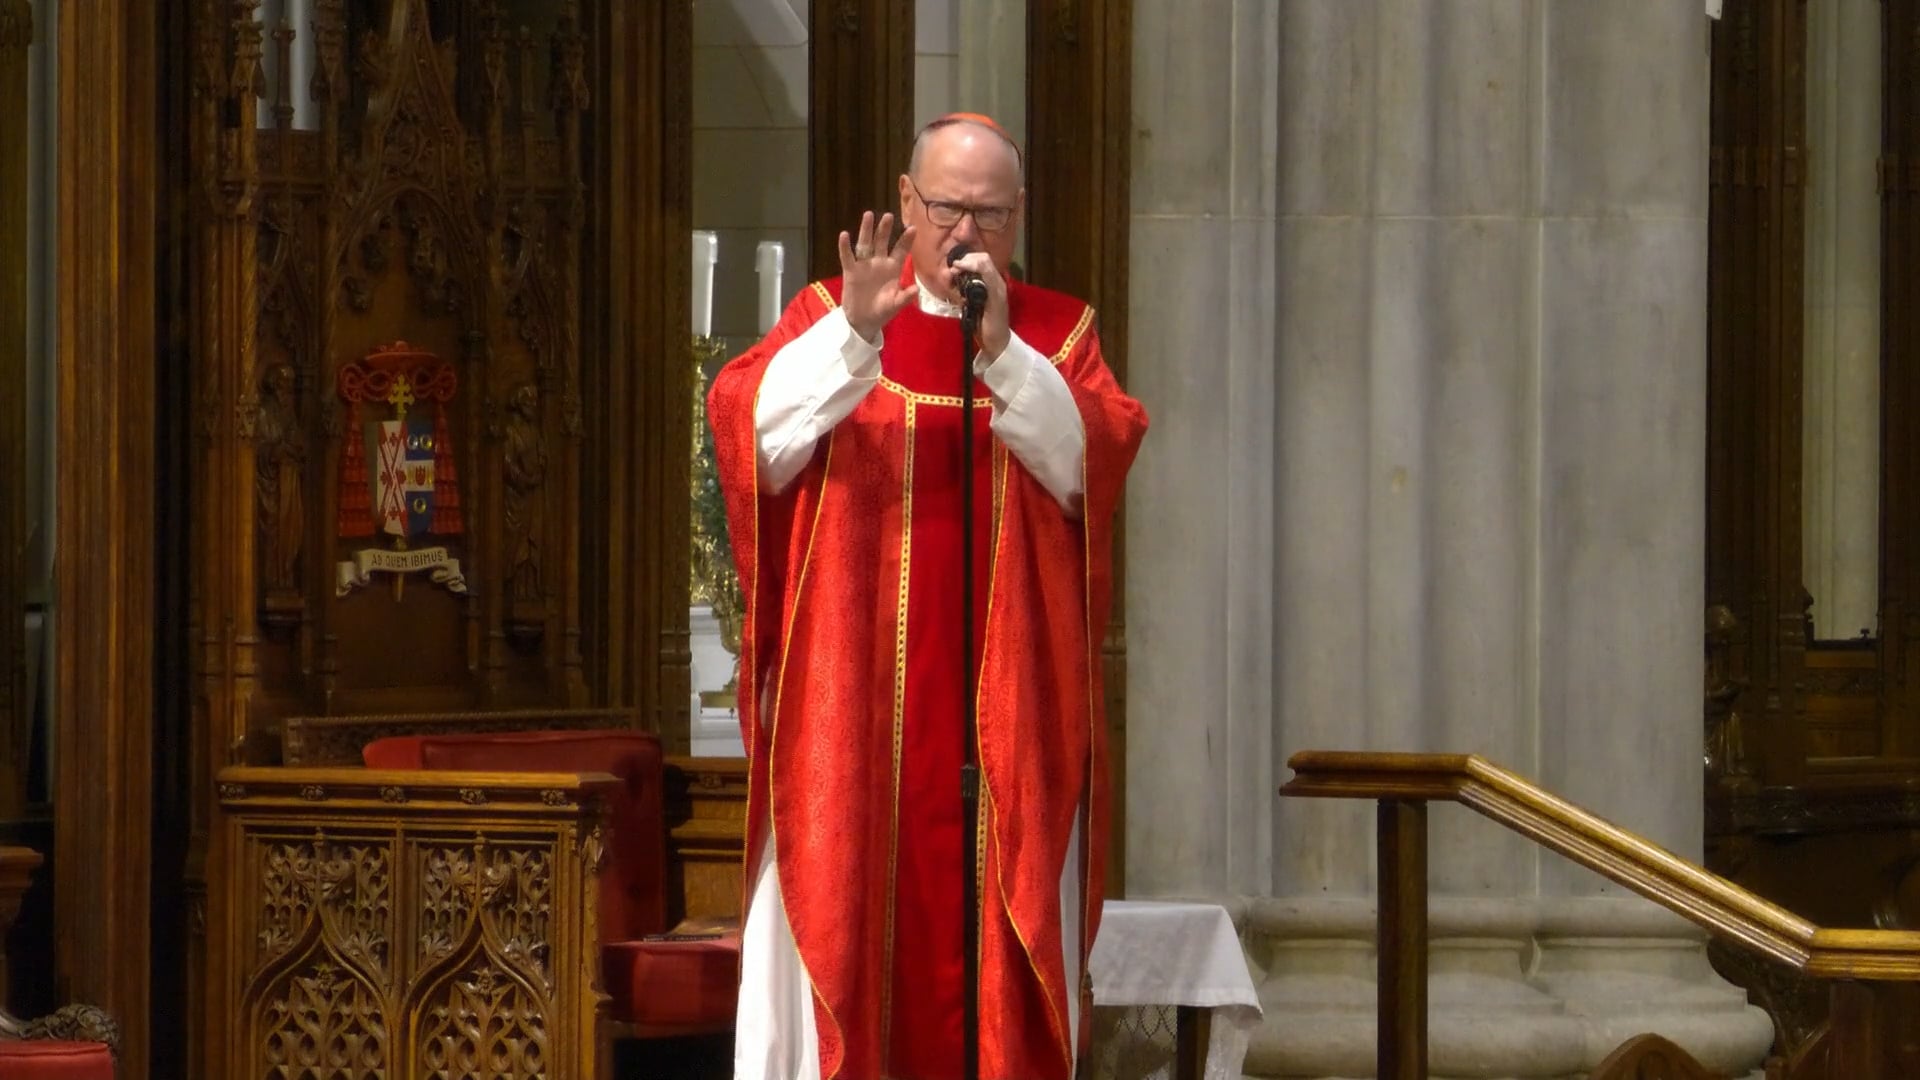 Mass from St. Patrick's Cathedral - September 20, 2022